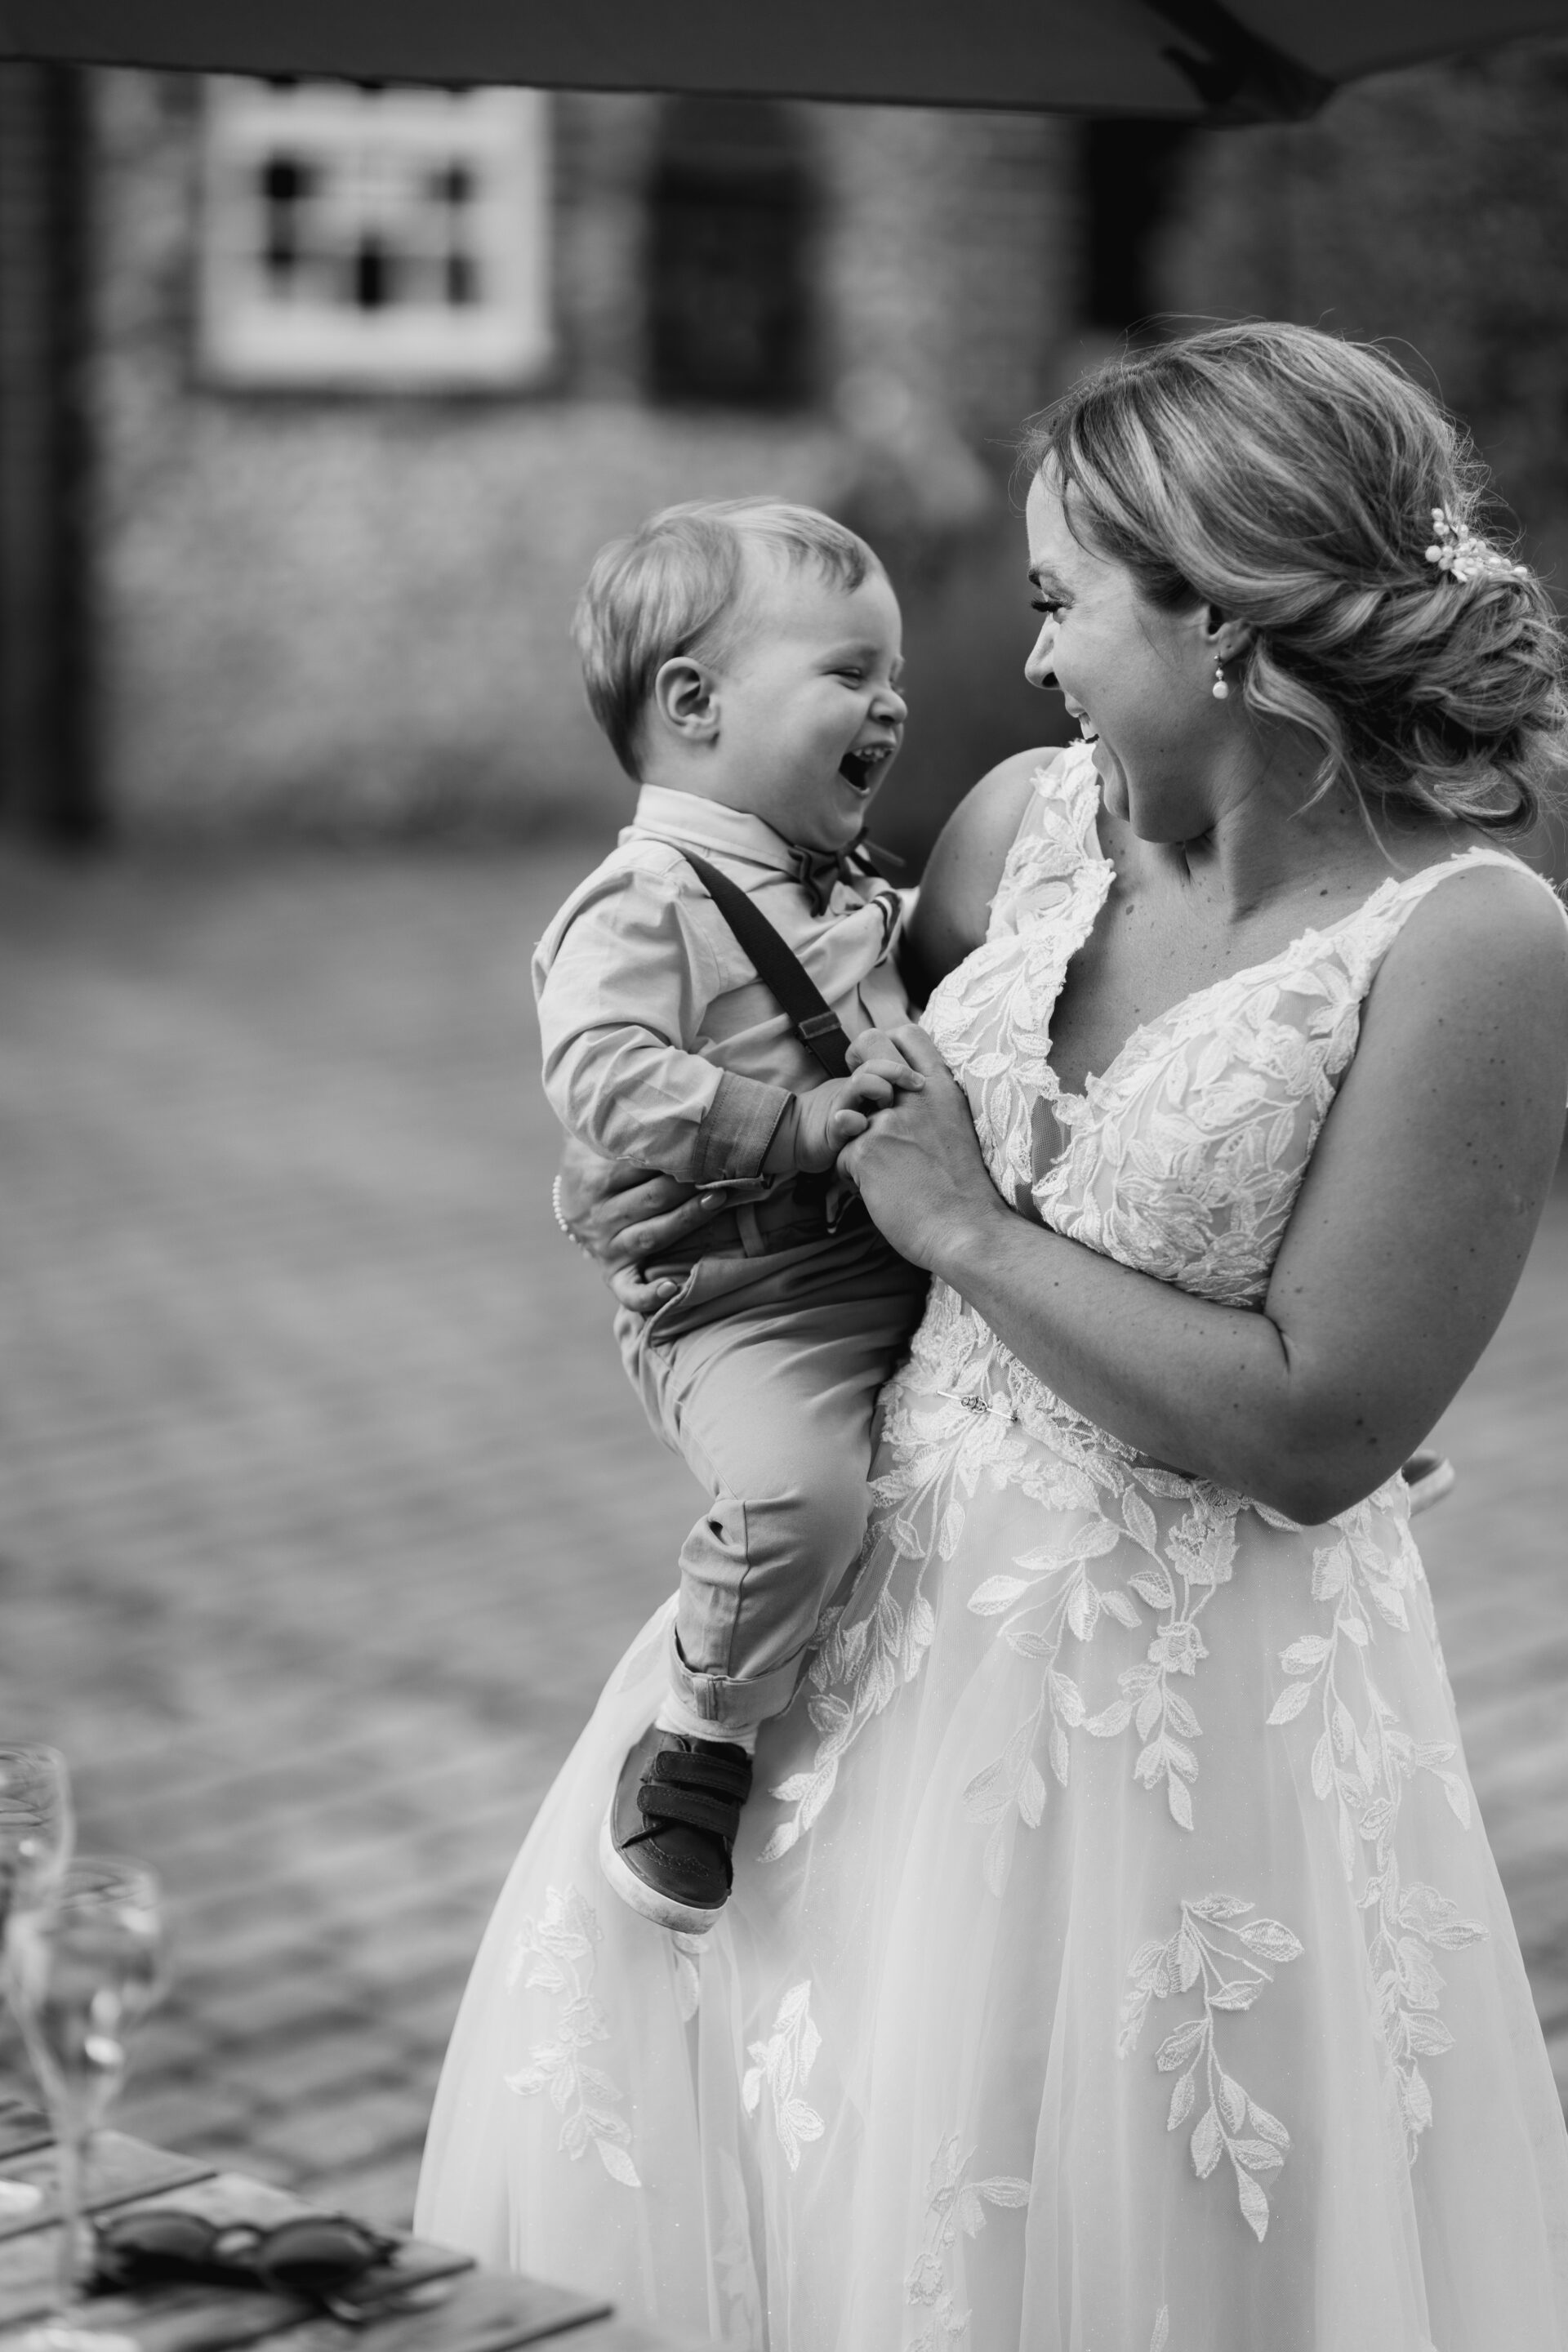 The bride embraces her son at Old Luxters Barn wedding venue in Oxfordshire